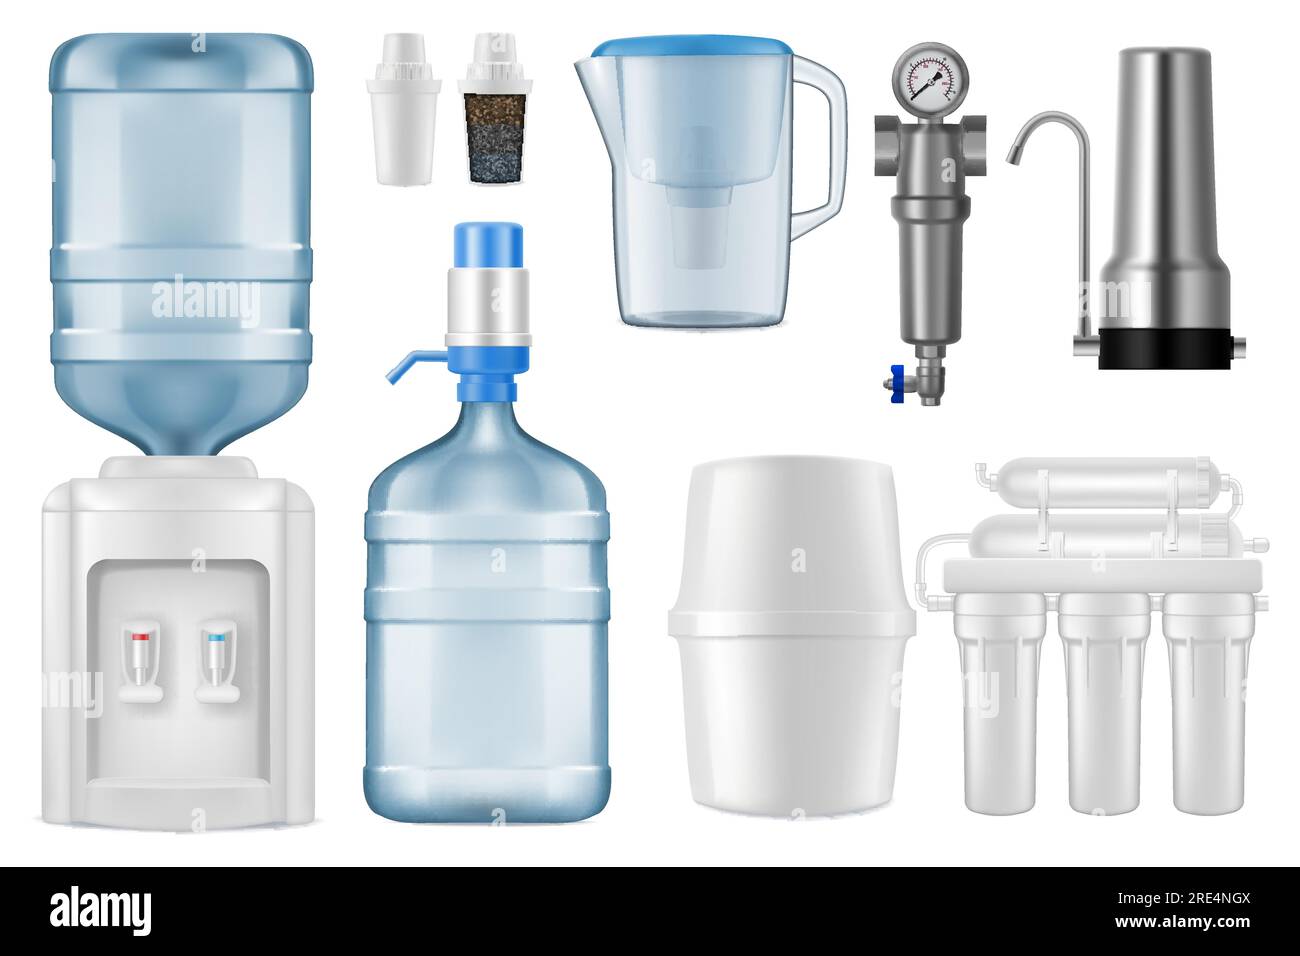 Water filter realistic vector mockups. 3d filtration jug and purification system of reverse osmosis with storage tank, filter tap and cartridges, cooler, bottle with pump, filtration equipment design Stock Vector